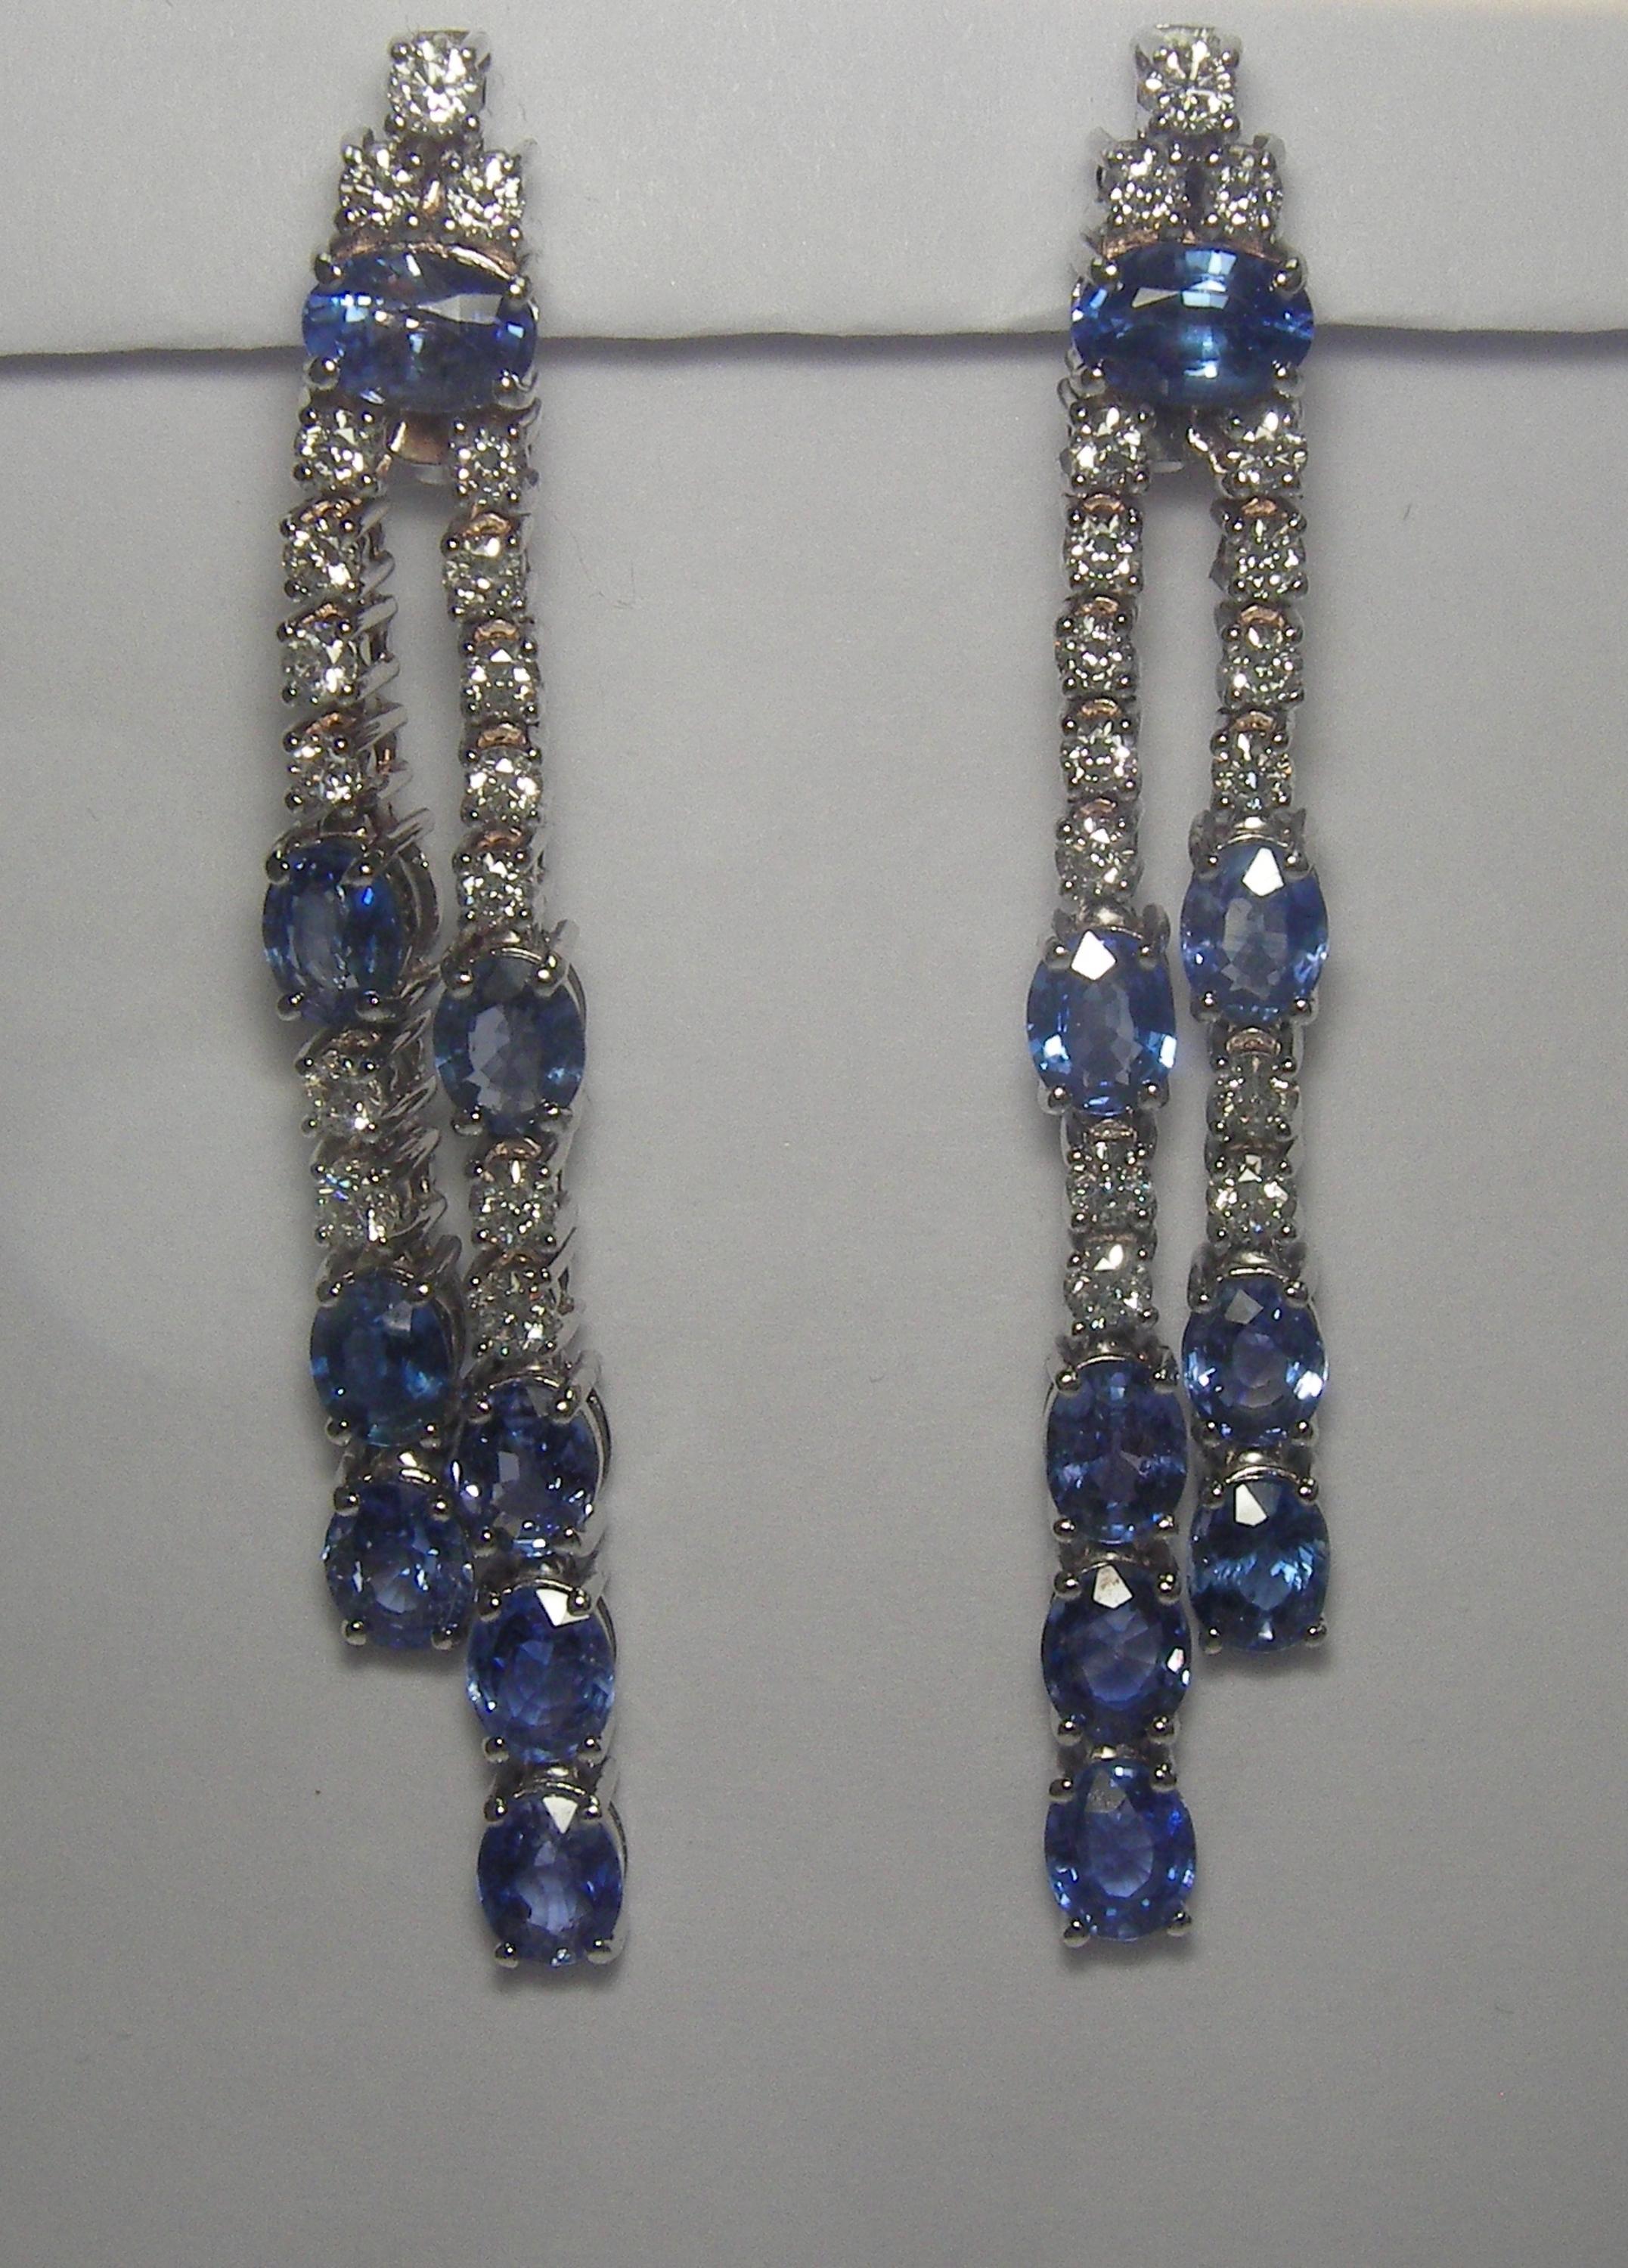 18 Karat White Gold Diamond and Sapphire Dangle Earrings

32 Diamonds 1,23  Carat H SI
16Sapphires  7,50  Carat


Founded in 1974, Gianni Lazzaro is a family-owned jewelry company based out of Düsseldorf, Germany.
Although rooted in Germany, Gianni